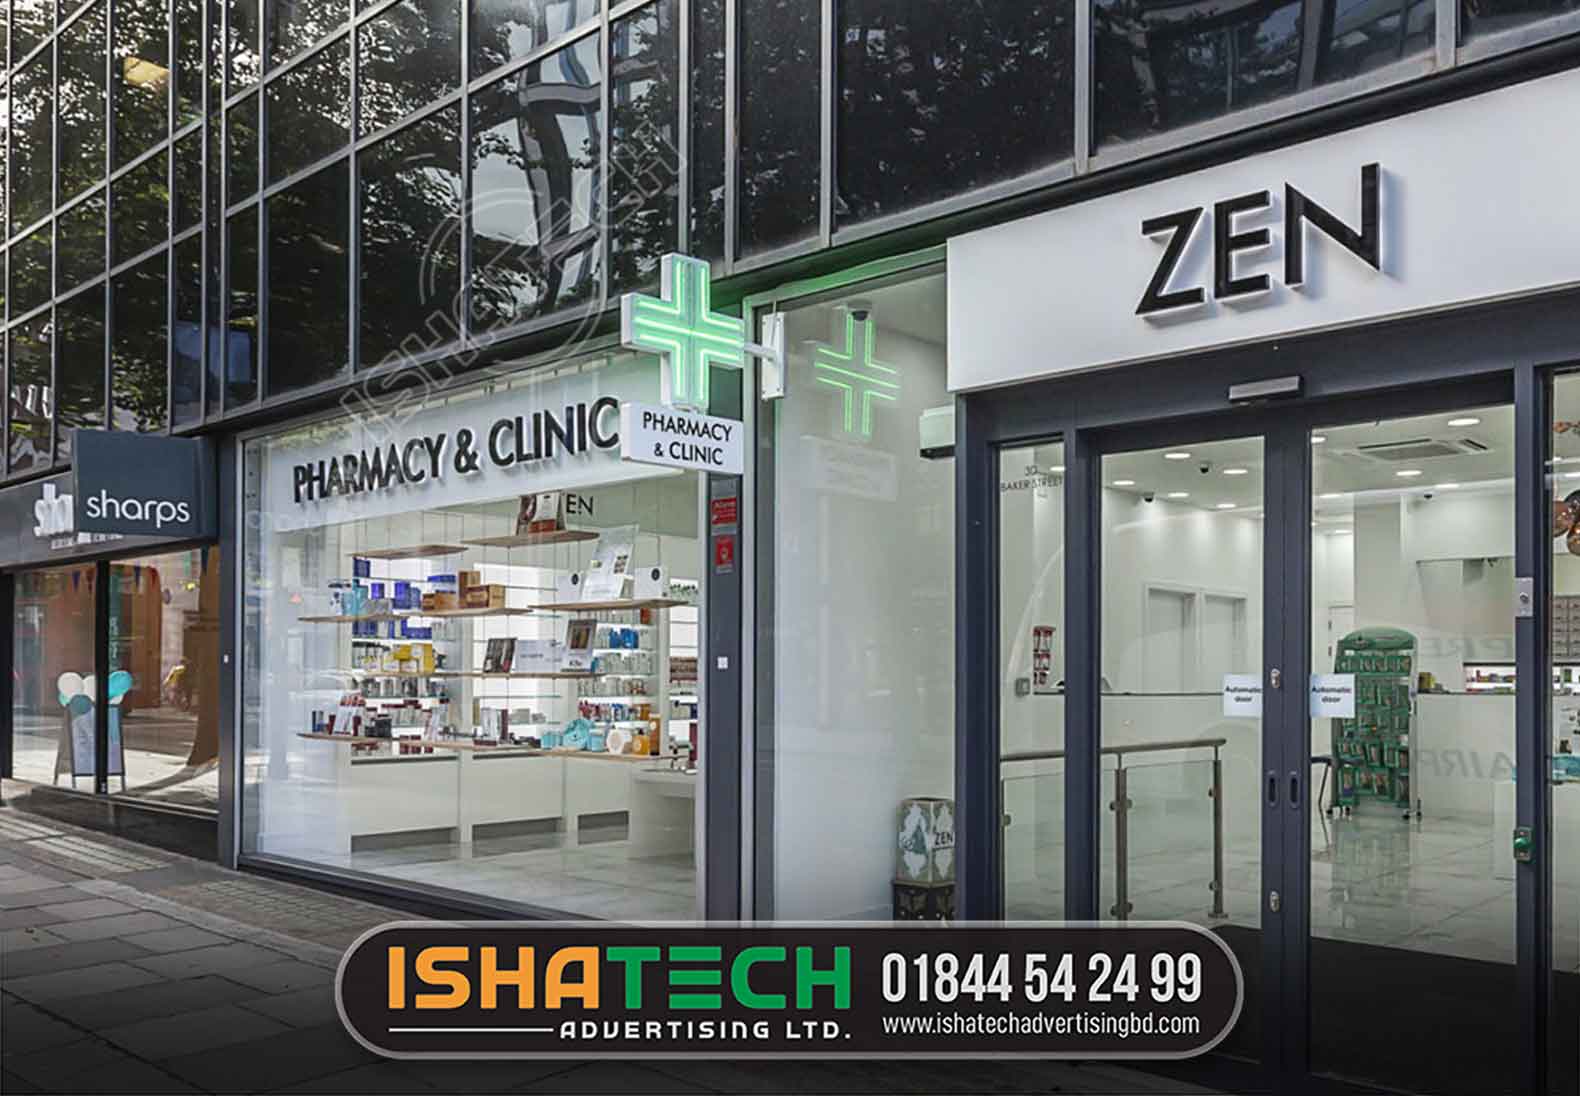 ZEN PHARMACY AND CLINIC SHOP SIGNBOARD AND BILLBOARD MAKER AND MANUFACTURER AGENCY IN DHAKA, BANGLADESH